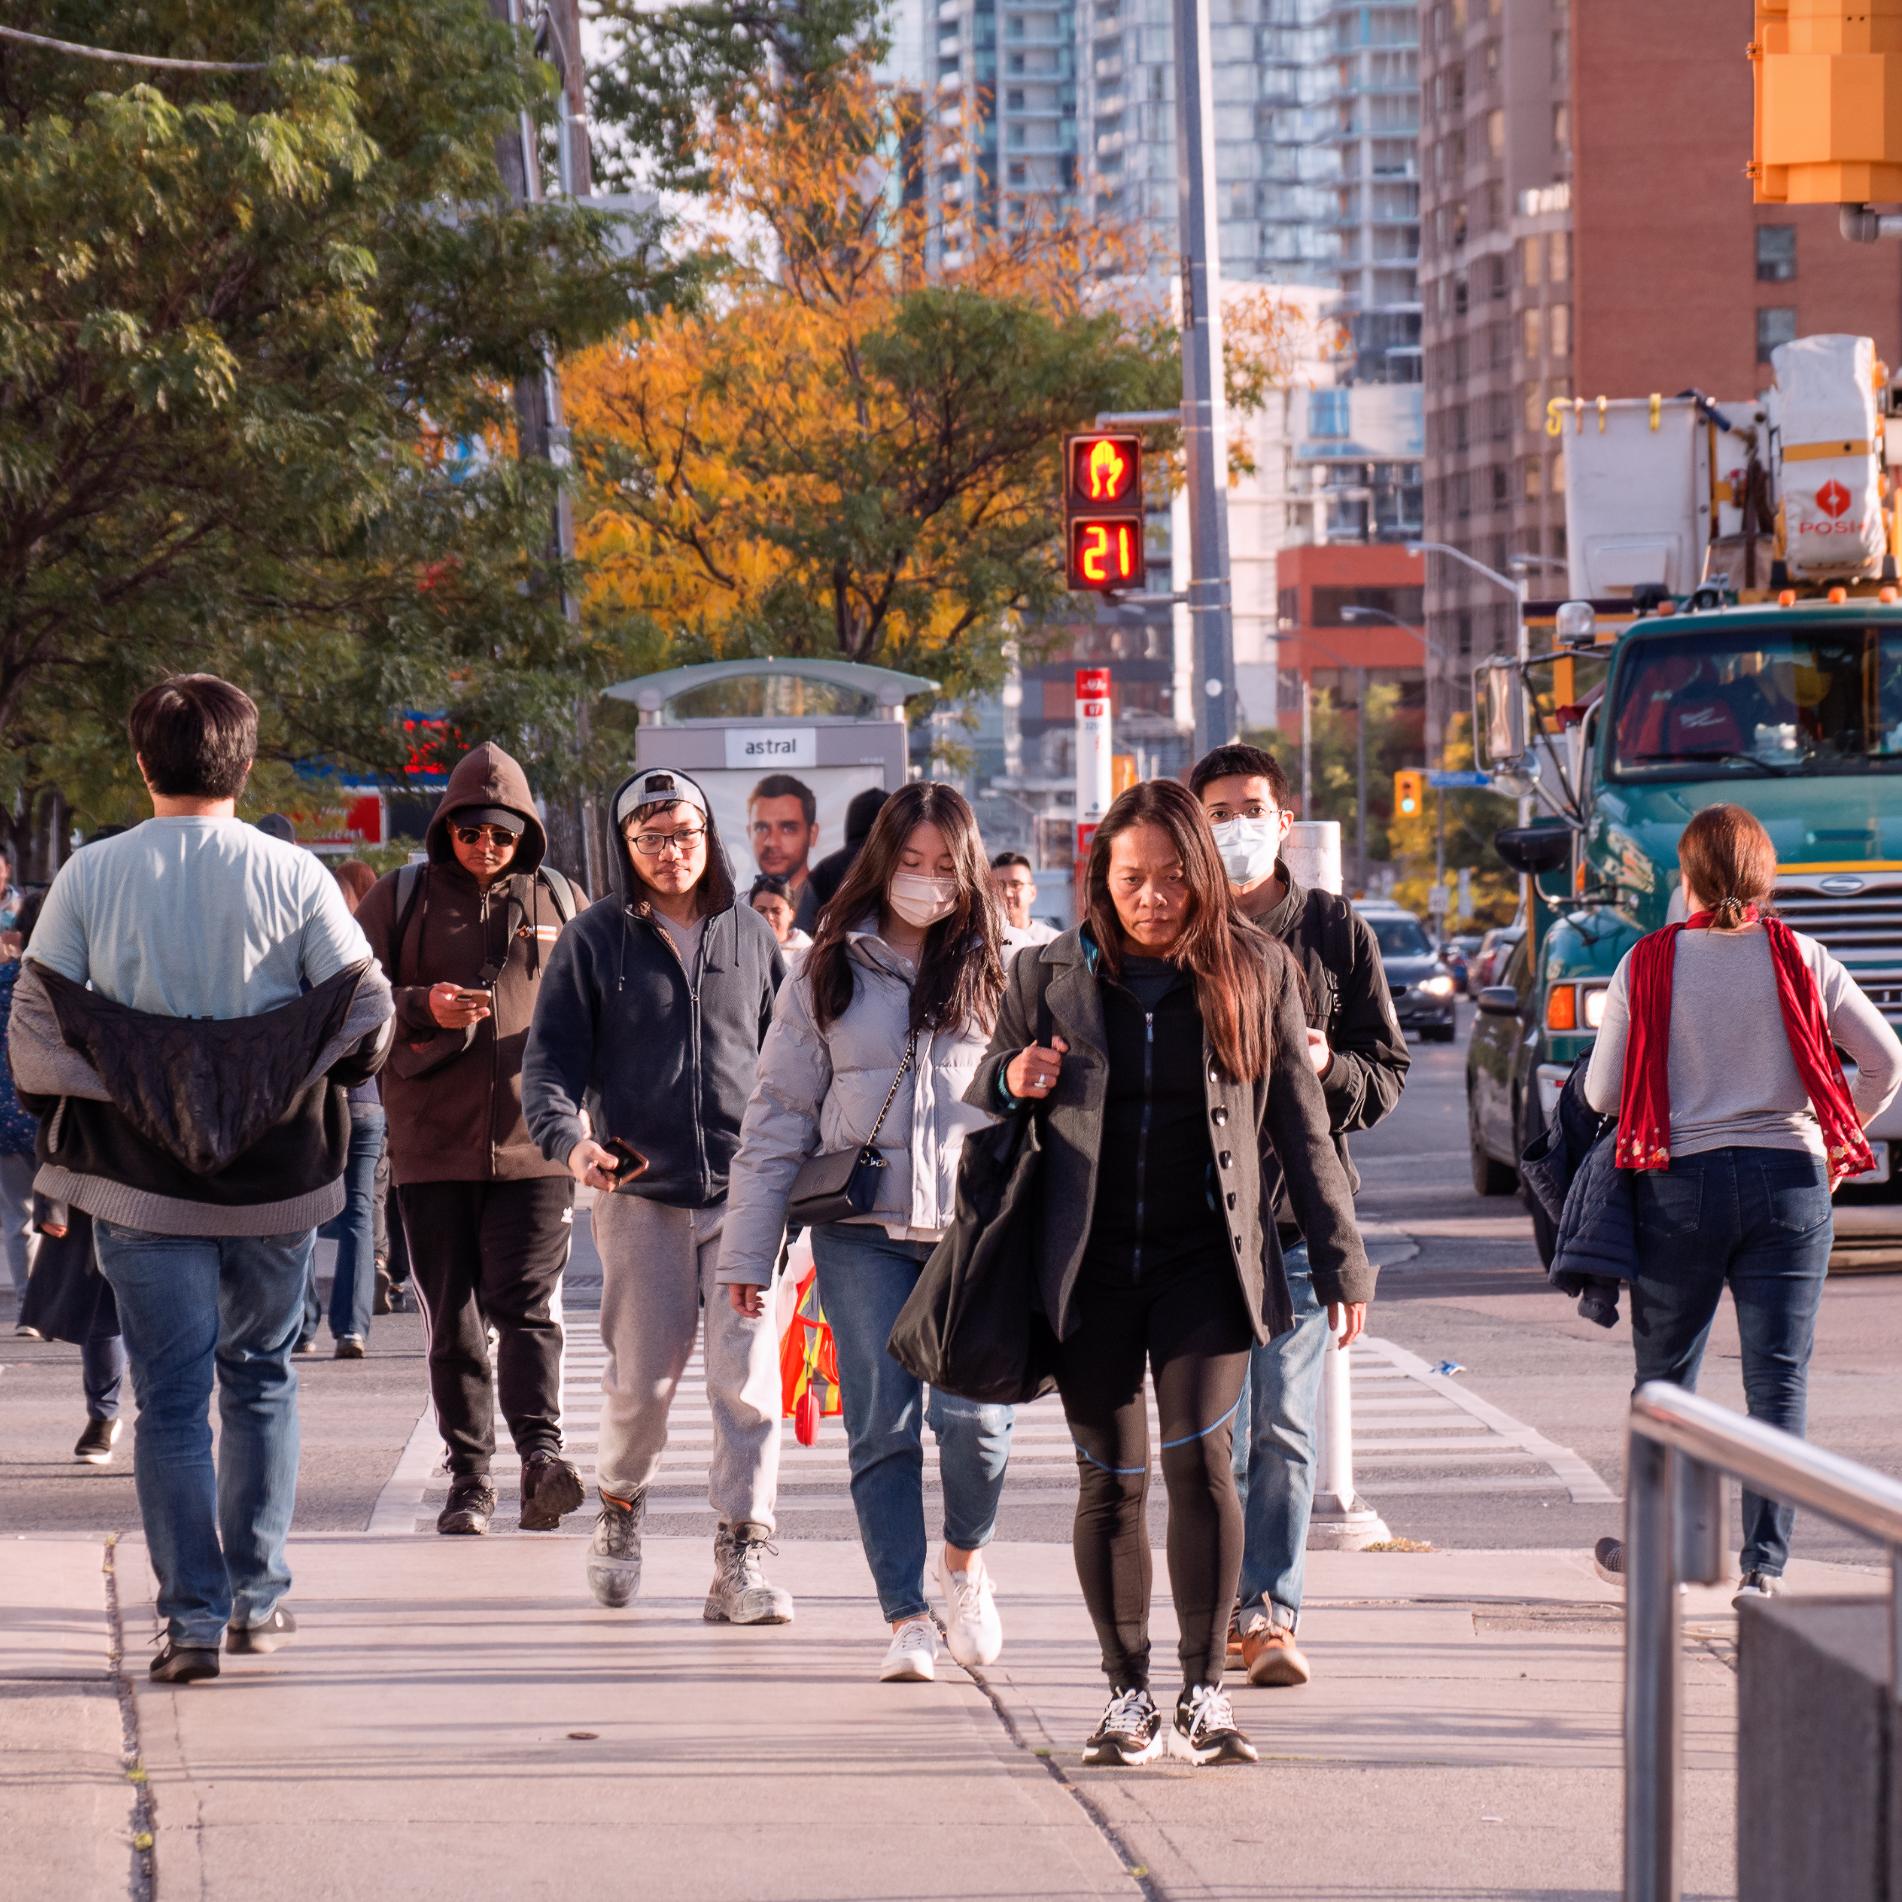 A crowd of people walking on the street in Toronto, on an early evening in 2022